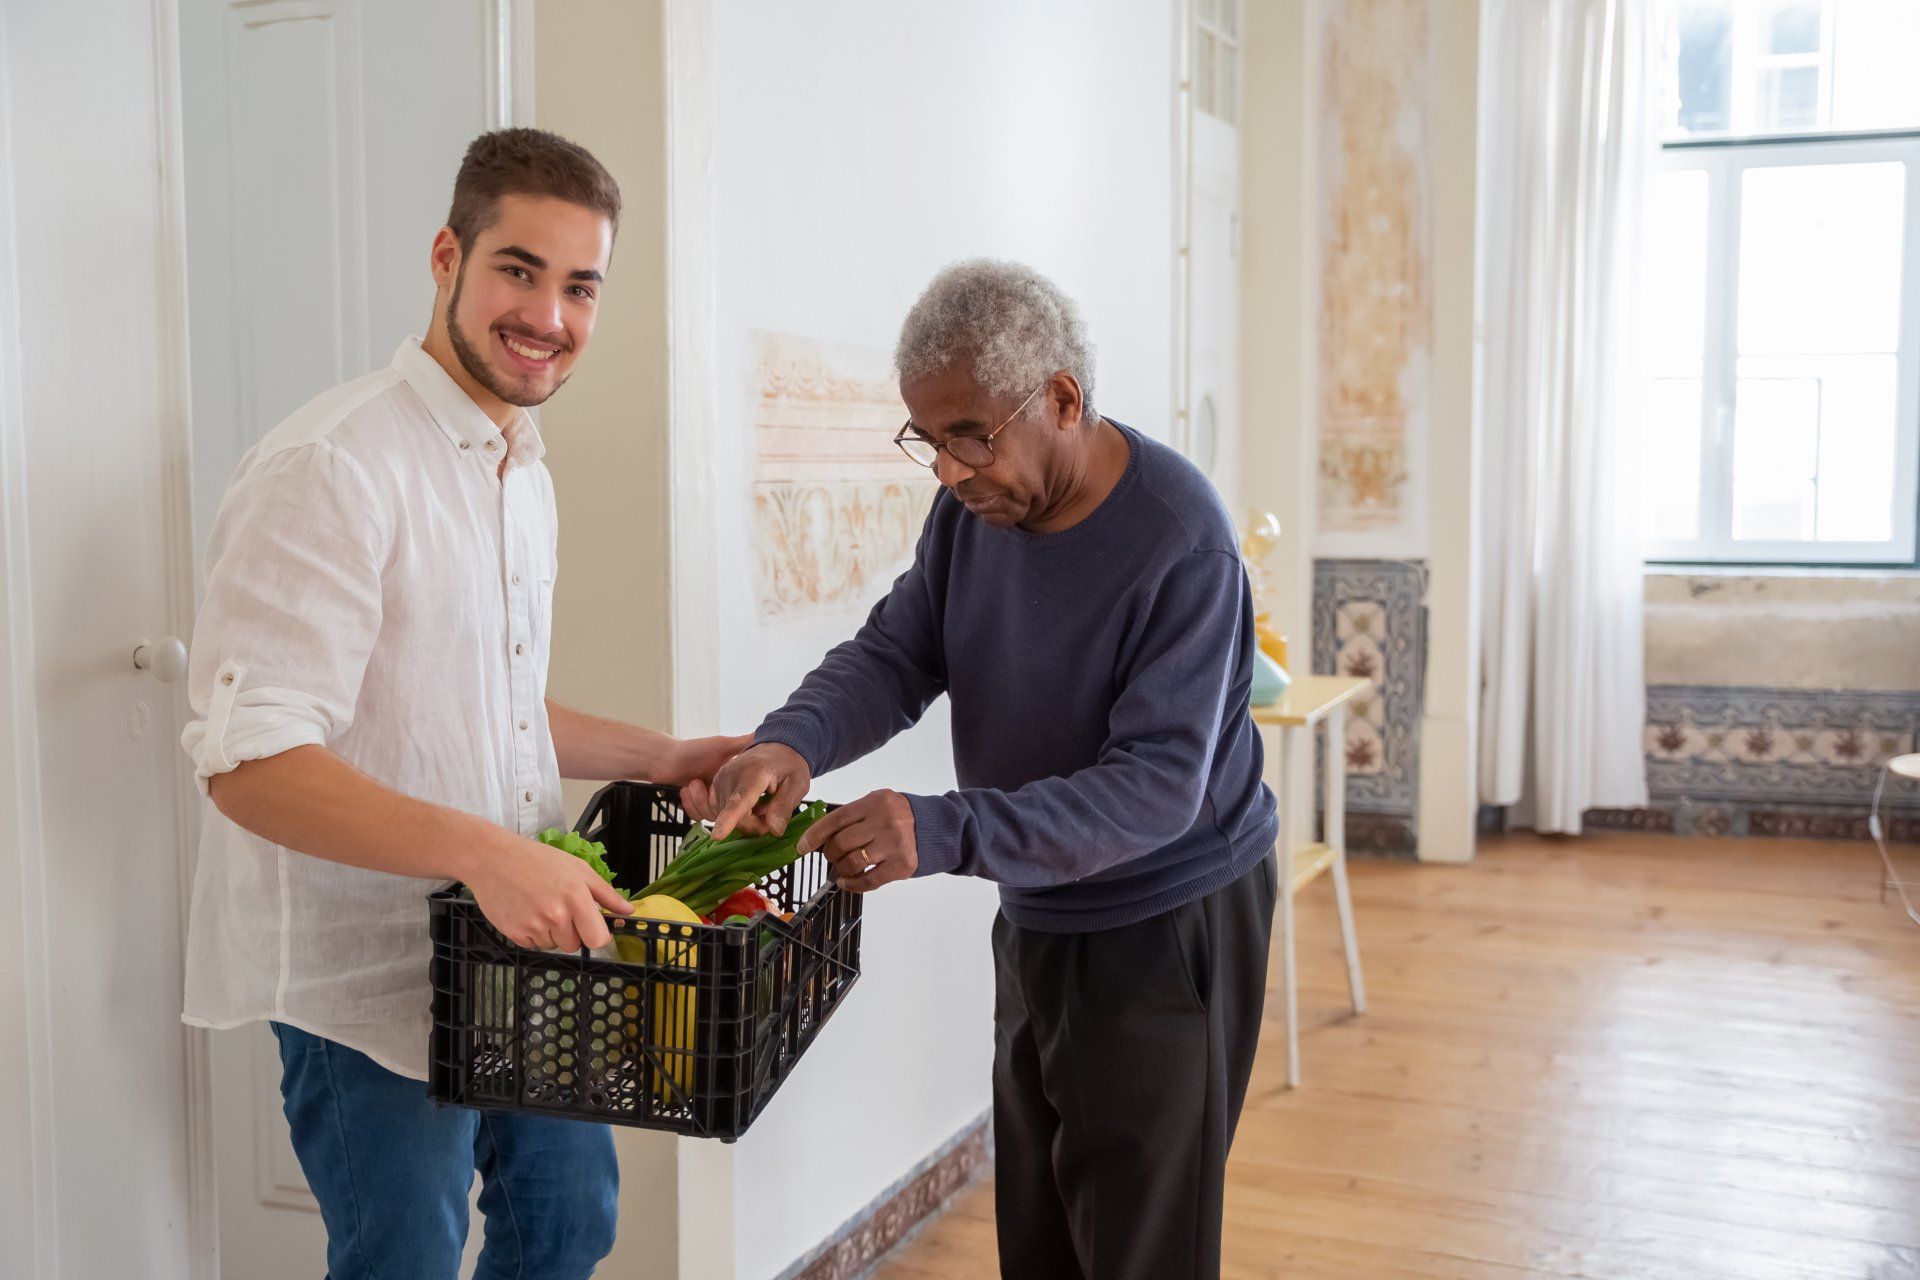 A young man is giving an older man a basket of vegetables.